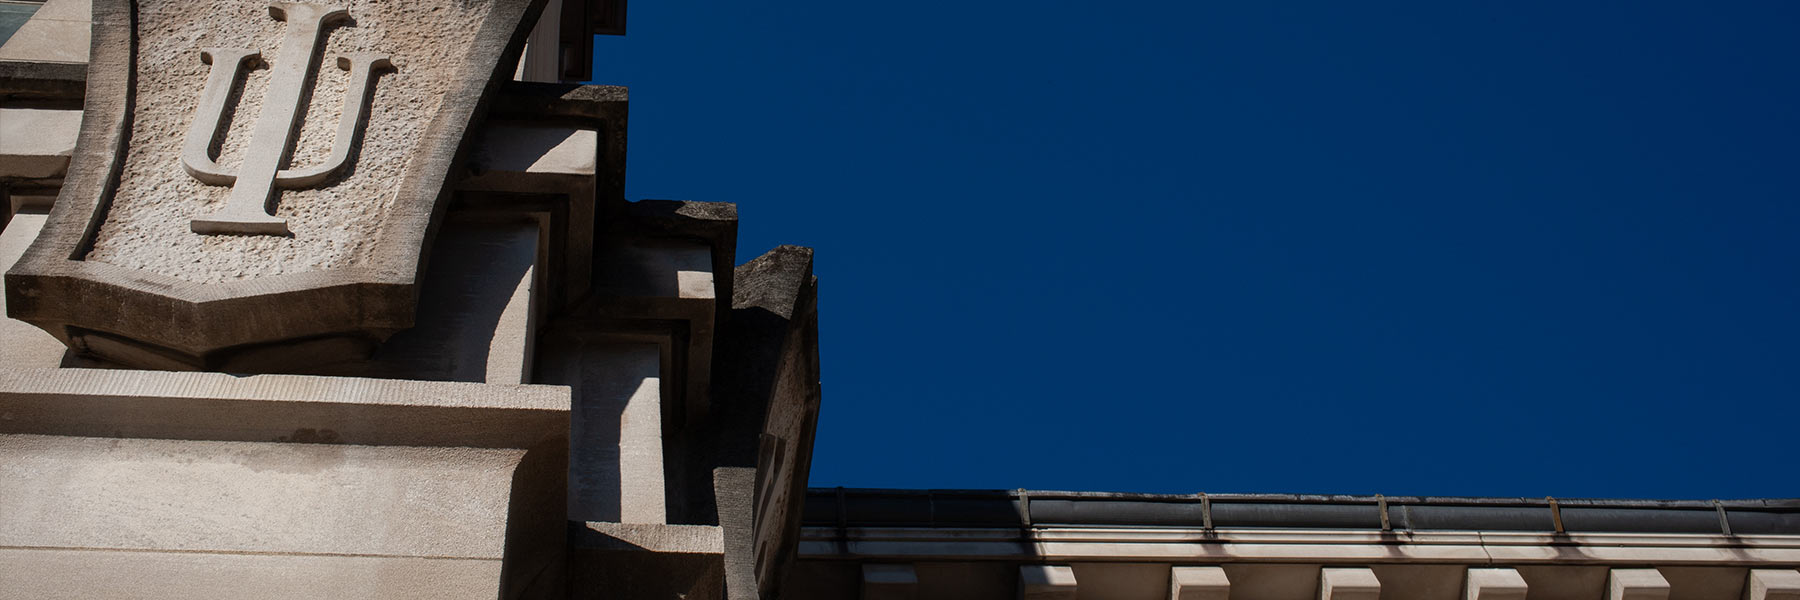 Campus building detail featuring the IU trident against a blue sky